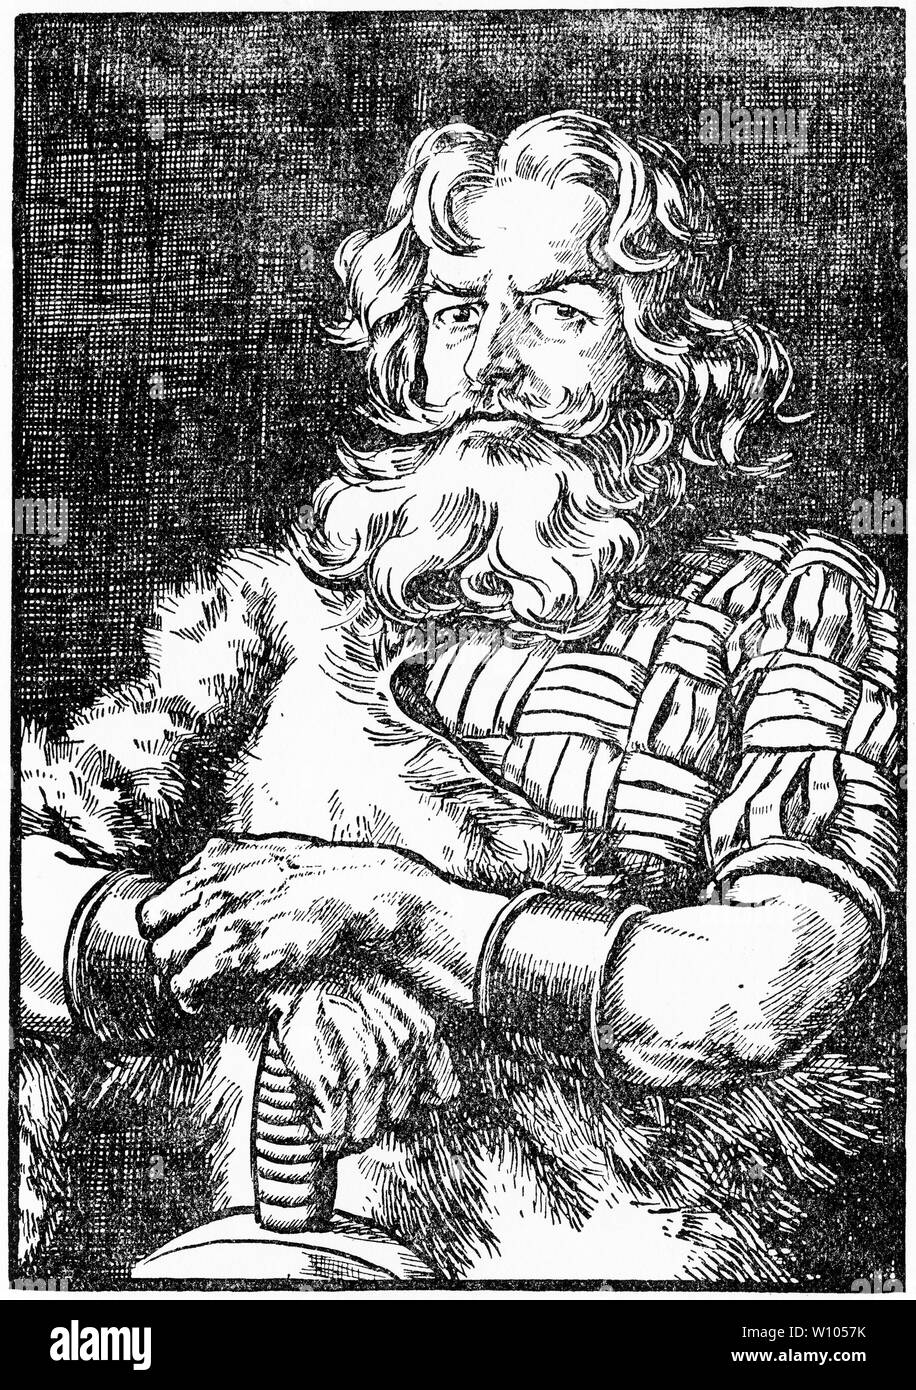 Engraving of Bernard the Dane (c.880 - c. 960), a Viking jarl (earl) of Danish origins. He put himself in the service of another jarl, Rollo, to conquer and colonize what would become Normandy. From an early edition of The Little Duke. Stock Photo